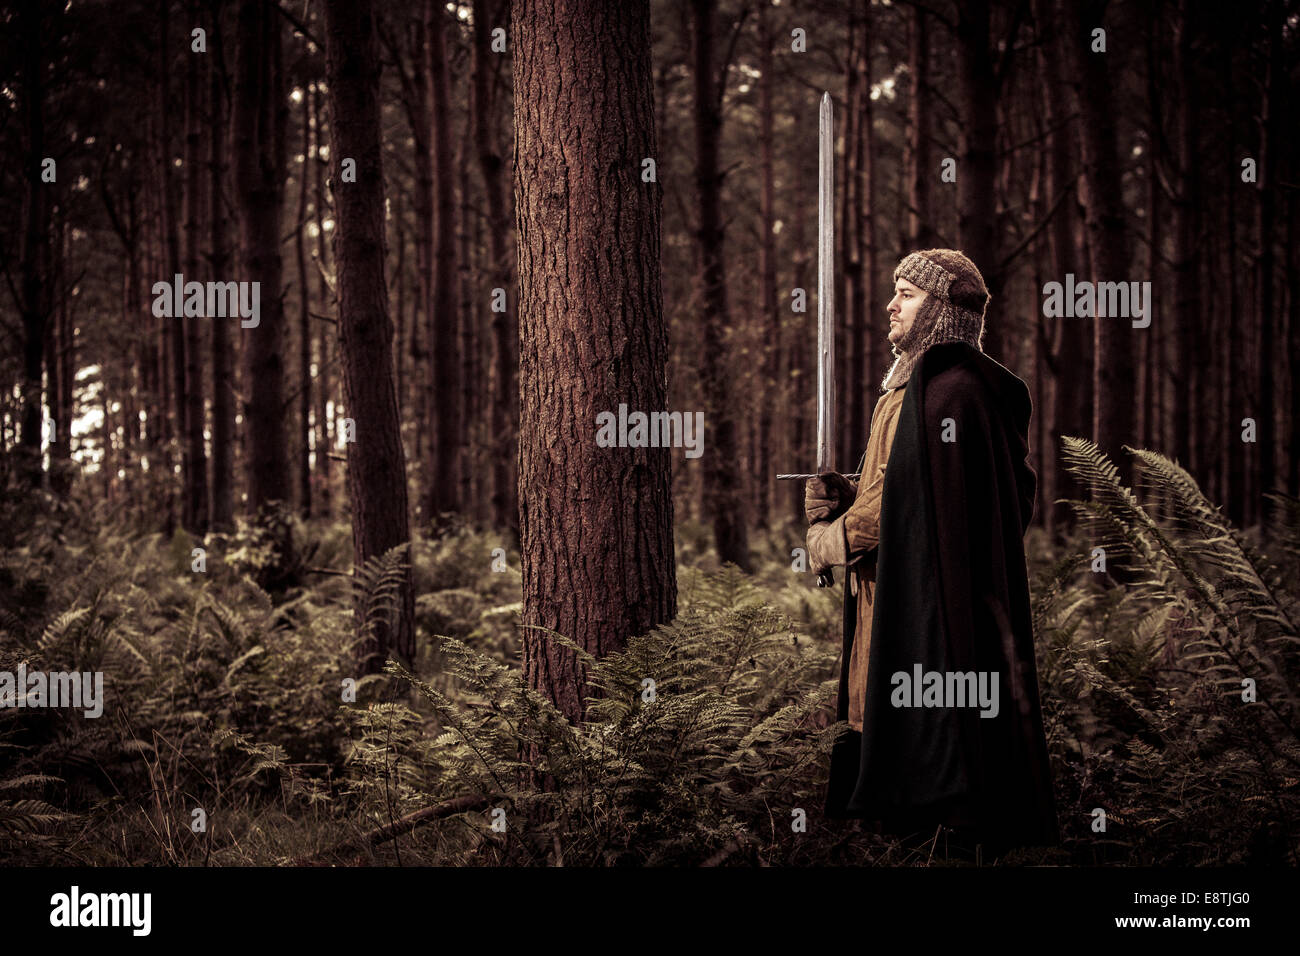 Deep in a forest a Warrior stands ready. Stock Photo